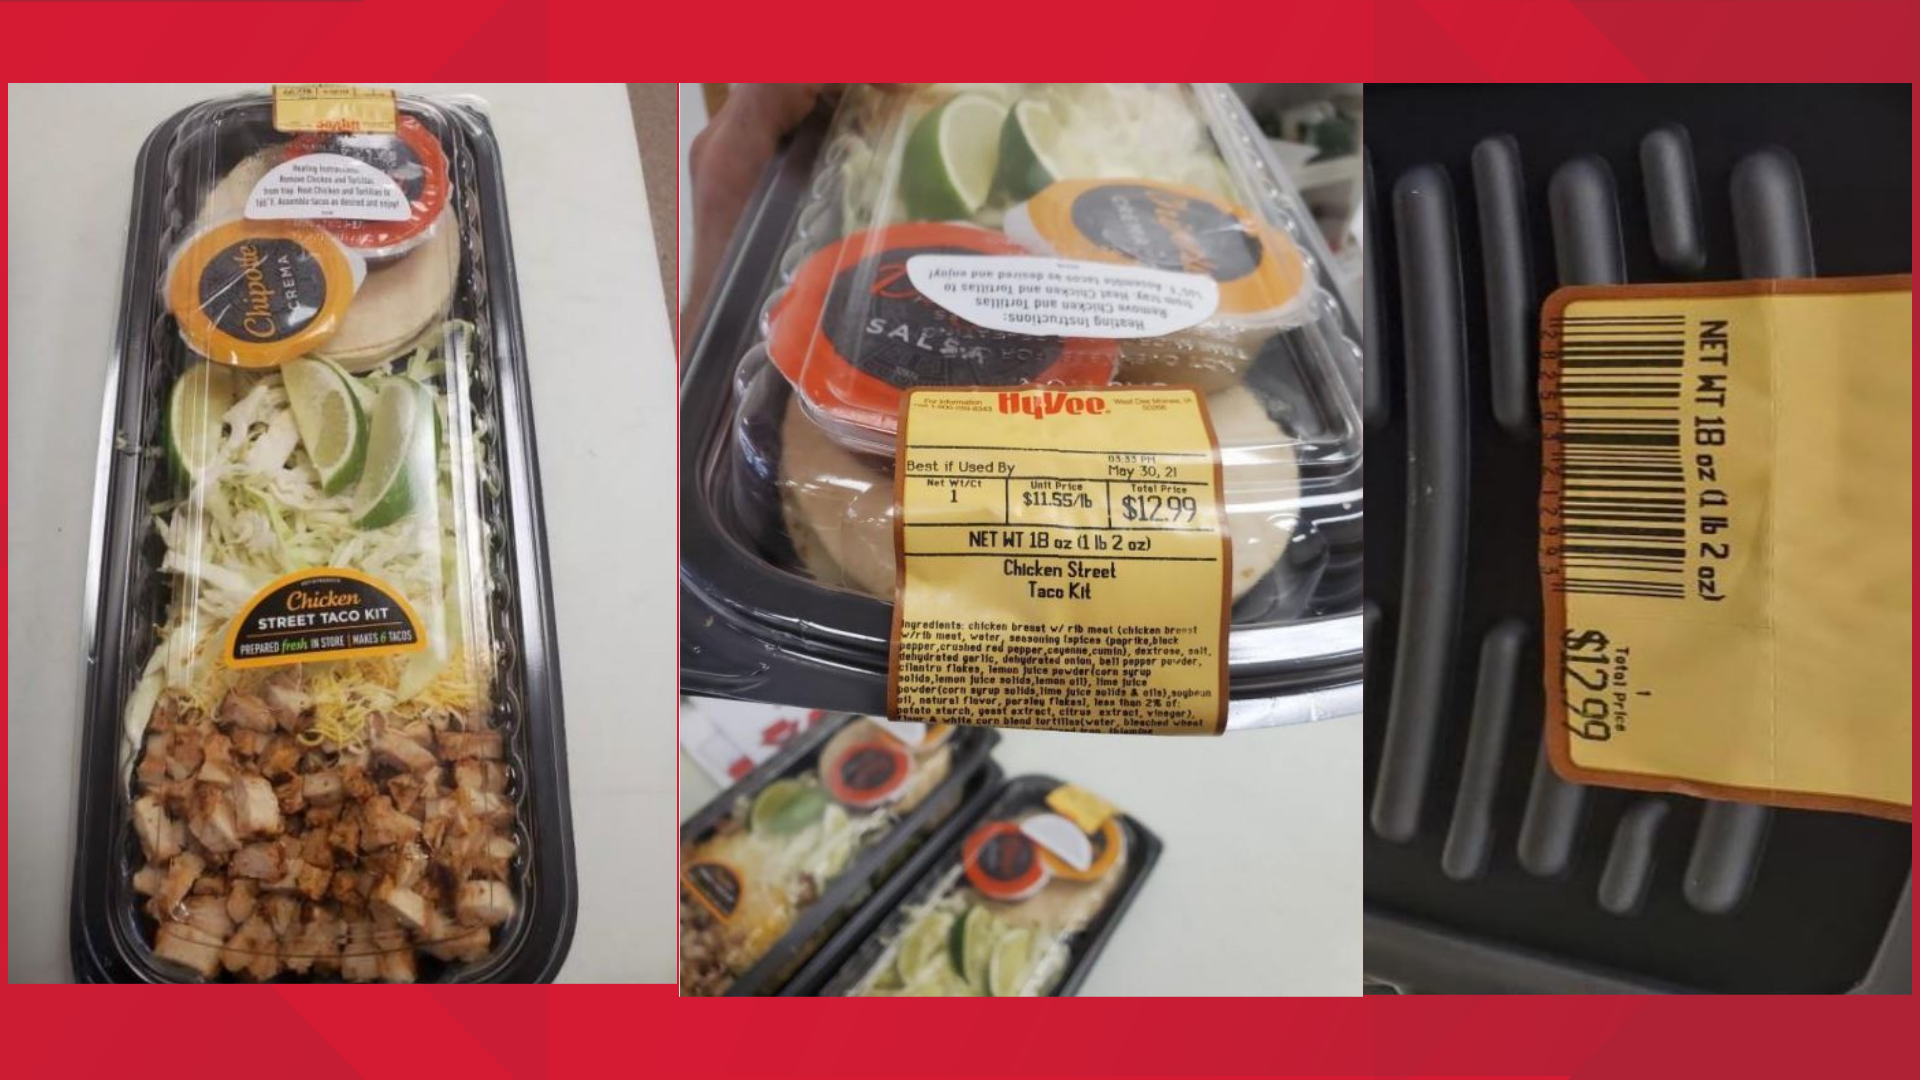 Hy-Vee is voluntarily recalling its Chicken Street Taco Kit due to eggs not being declared on the product's label.